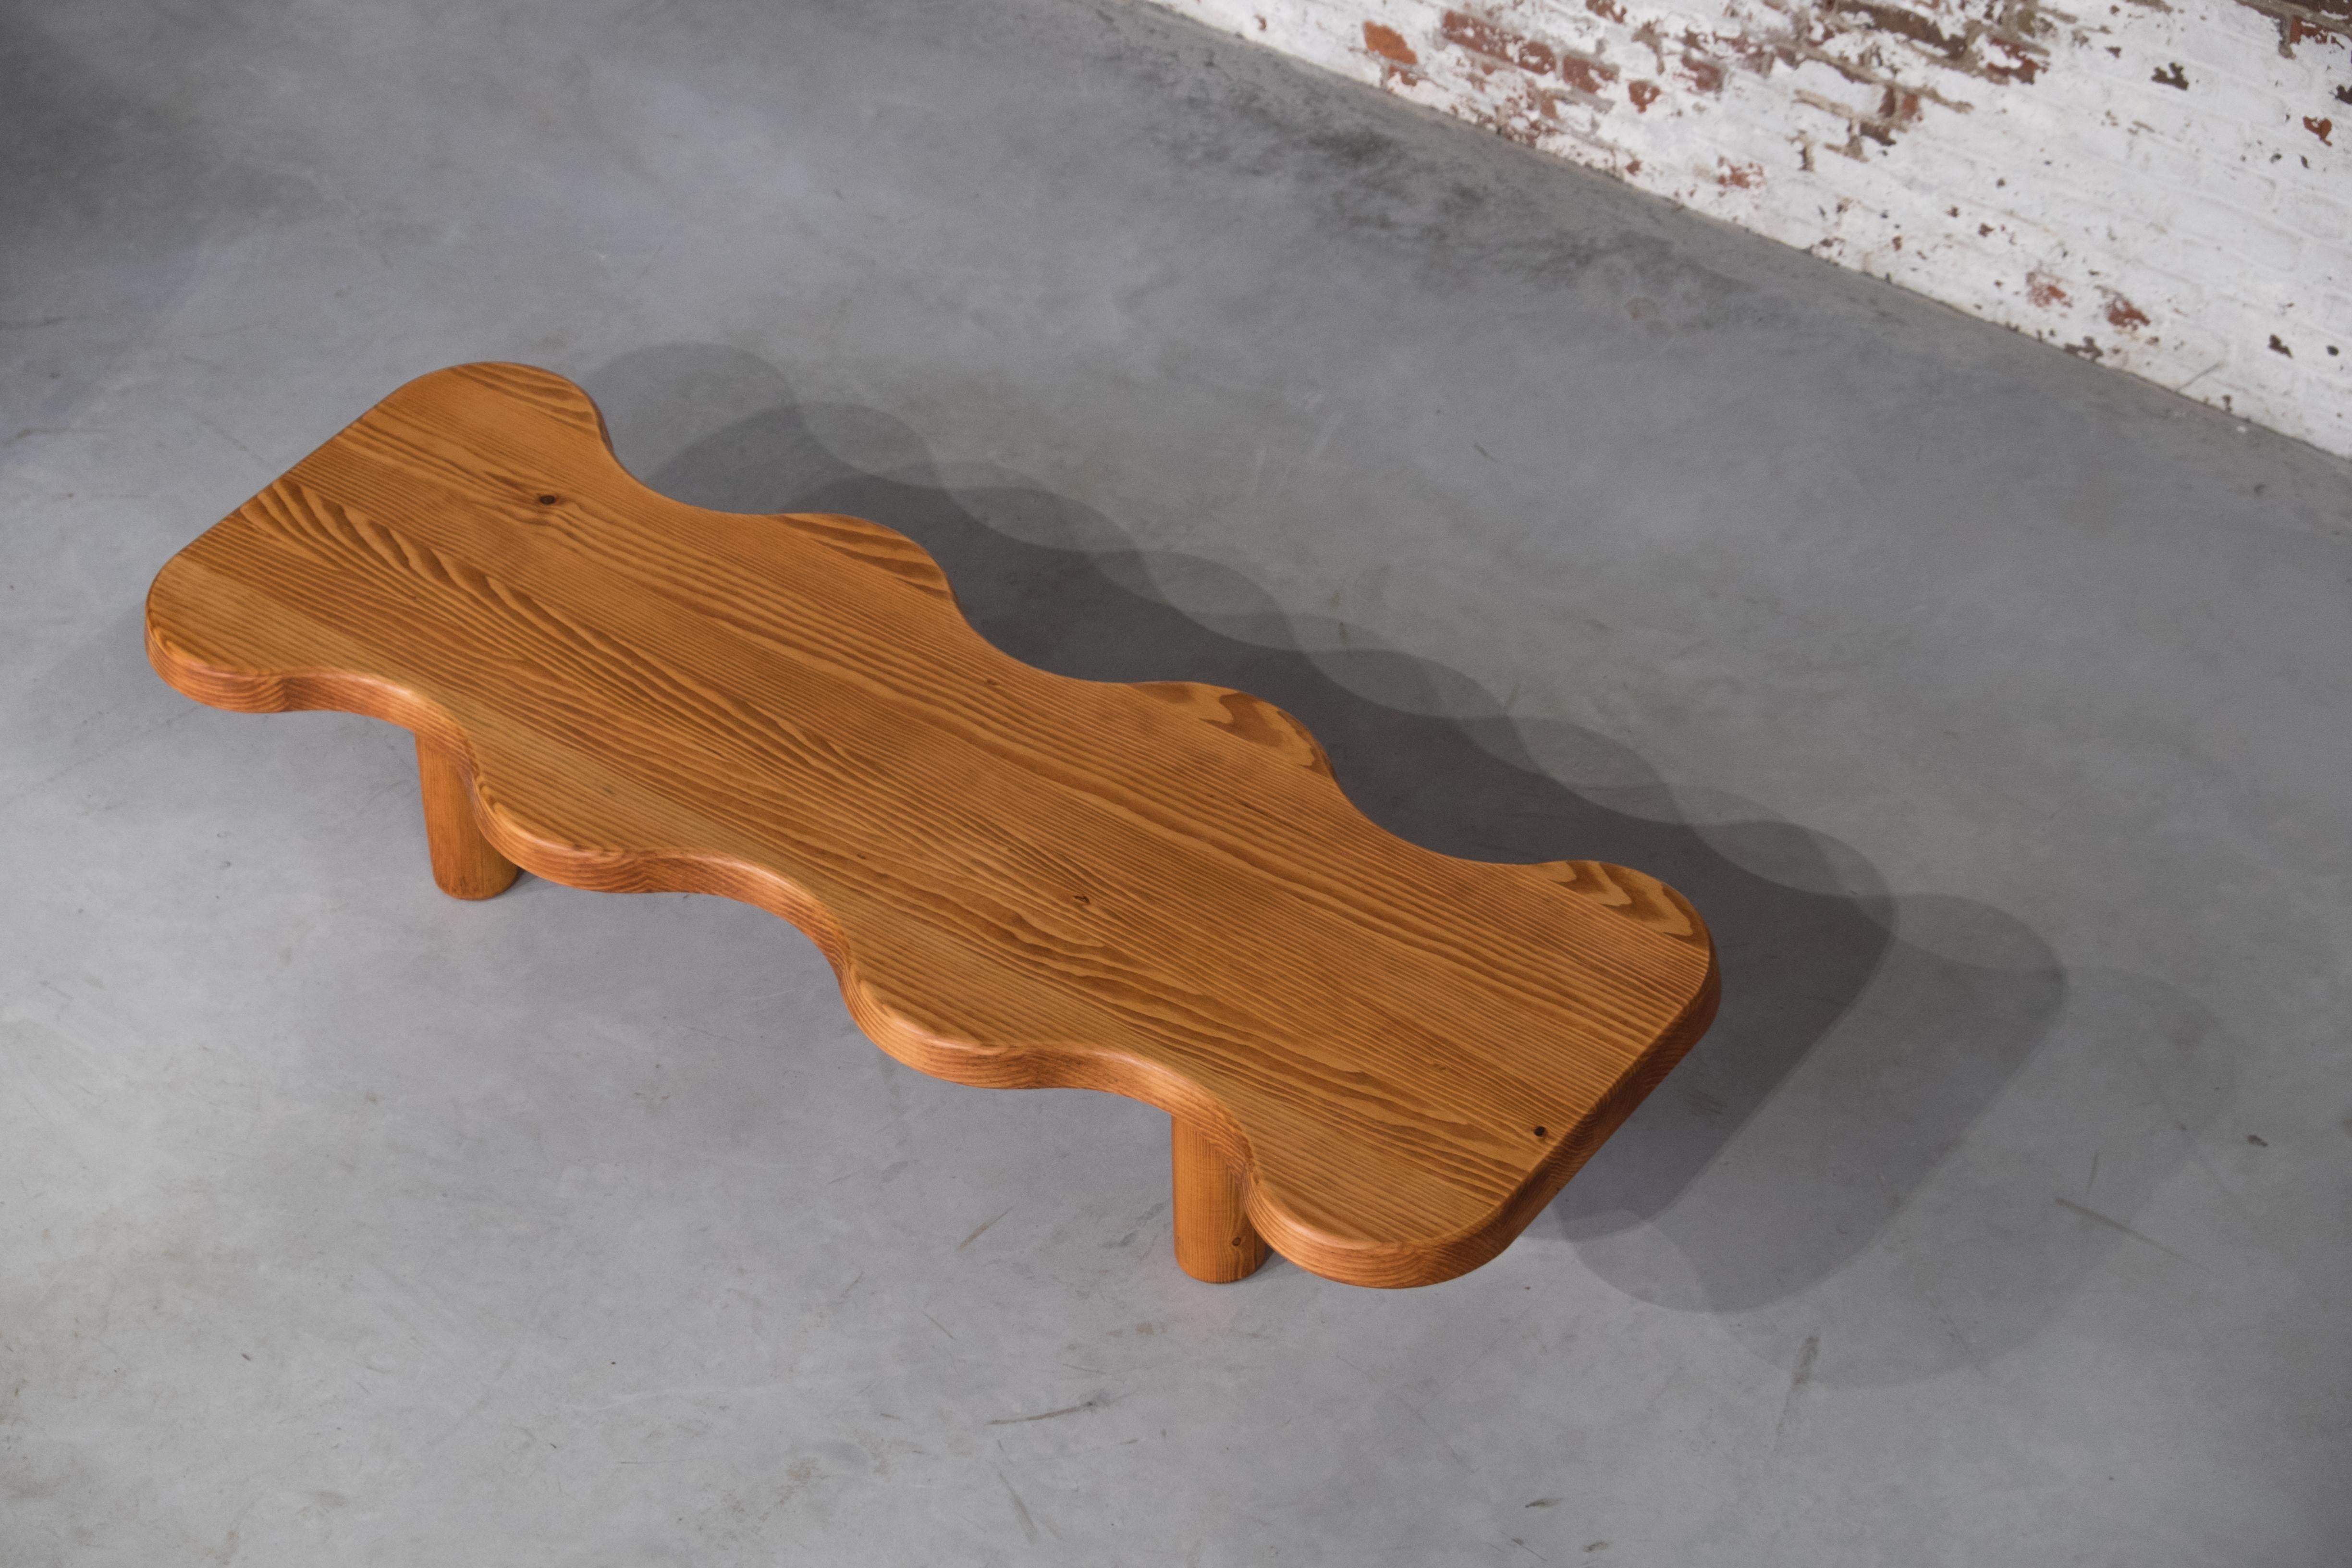 Crocodile low table by Atelier Thomas Serruys
Dimensions: L 180cm, W 64cm, H 34cm
Materials: Solid Oregon

Edition of 50

A soft edged symmetrical shaped coffee table in solid Oregon with hand-turned, demountable legs.

